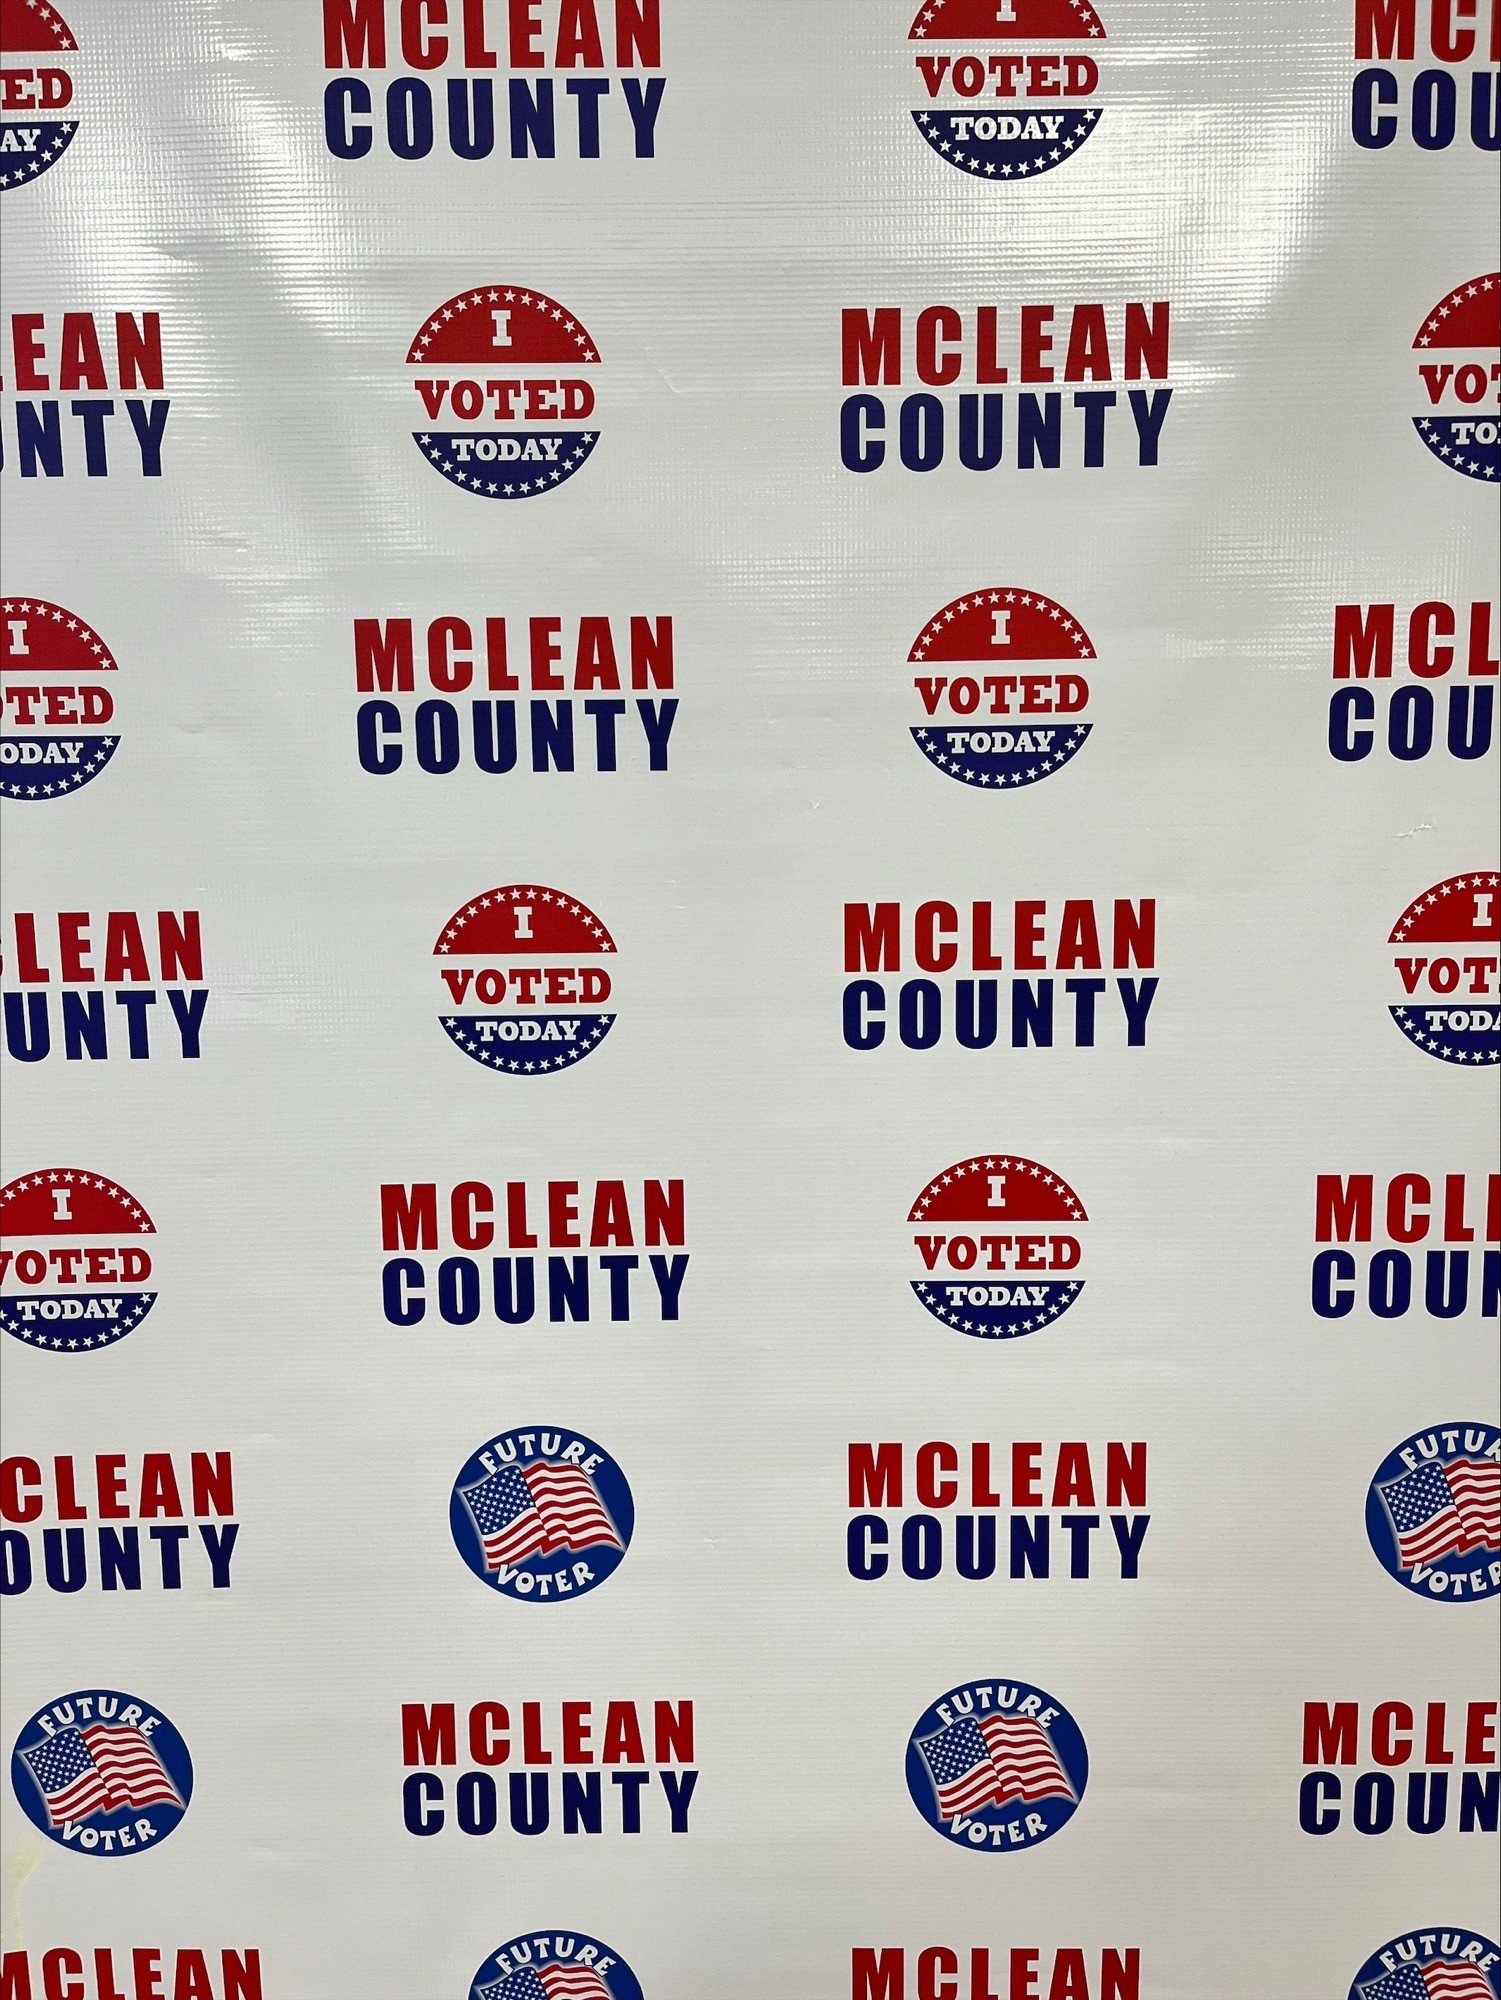 Primary elections wrap up; results in McLean County